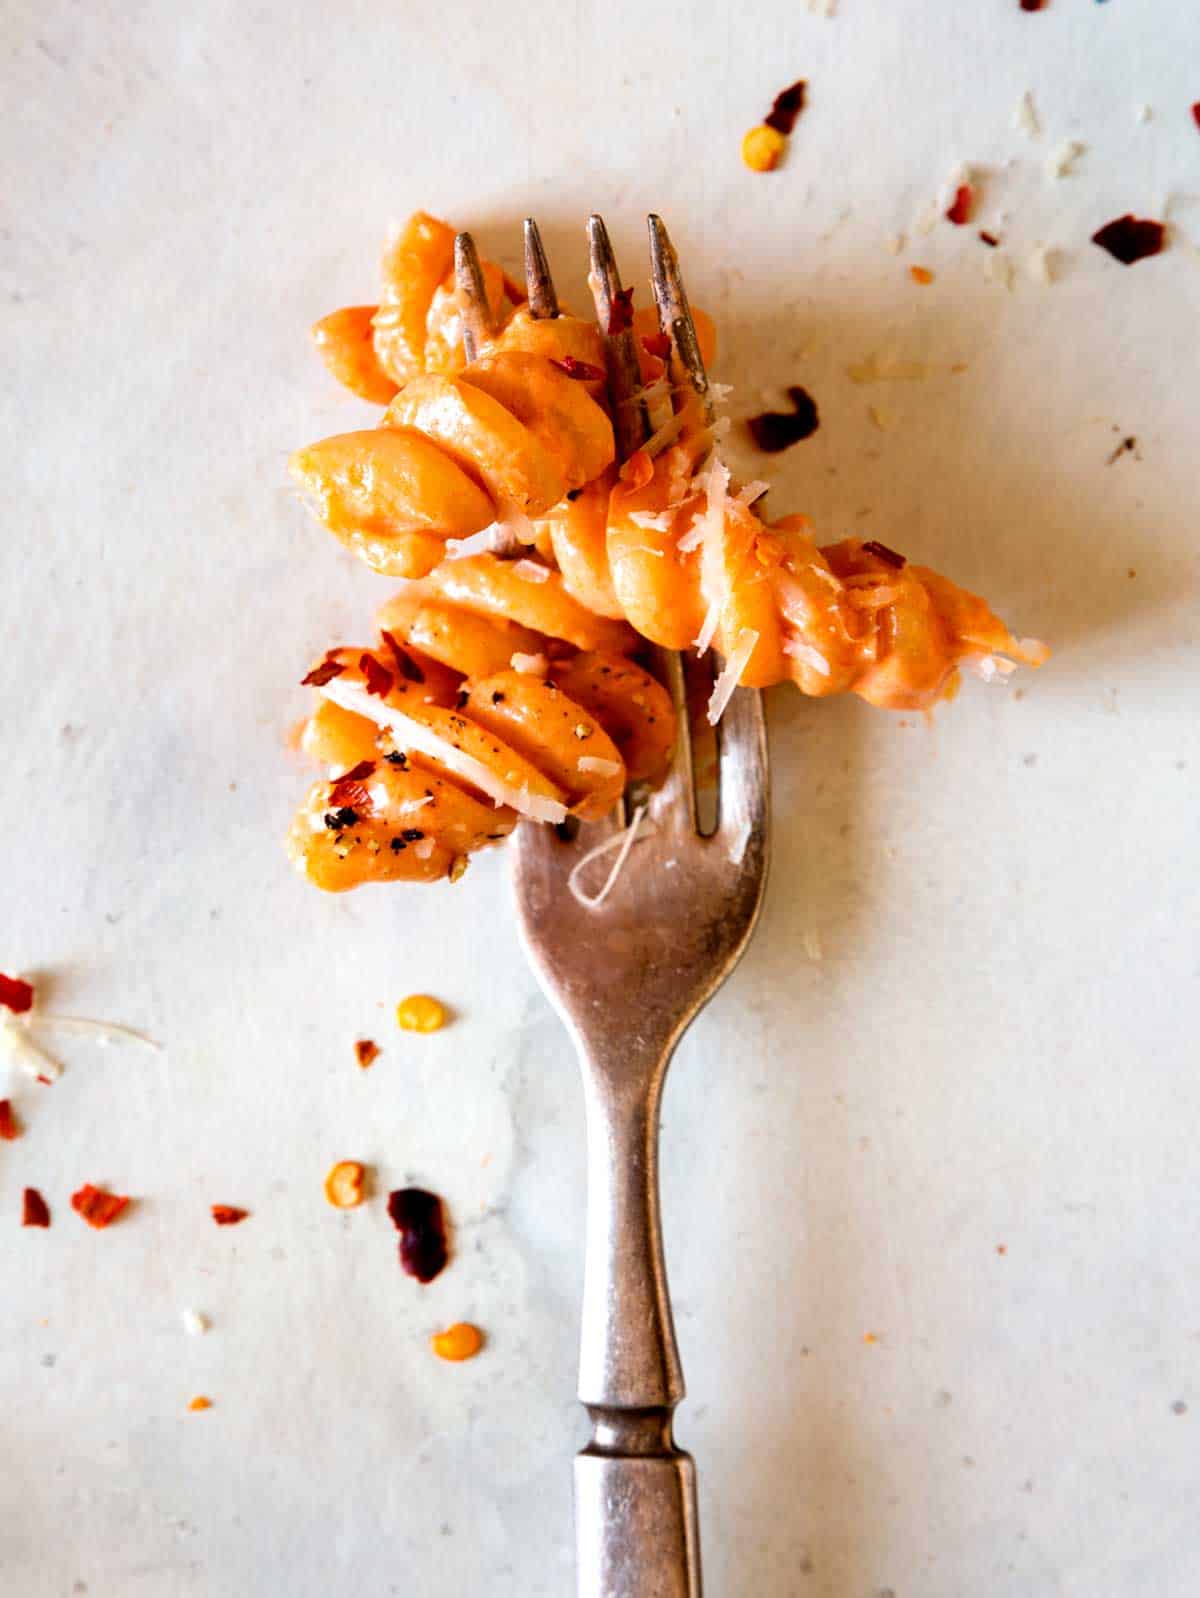 A close up of fusilli pasta with vodka sauce on a fork.